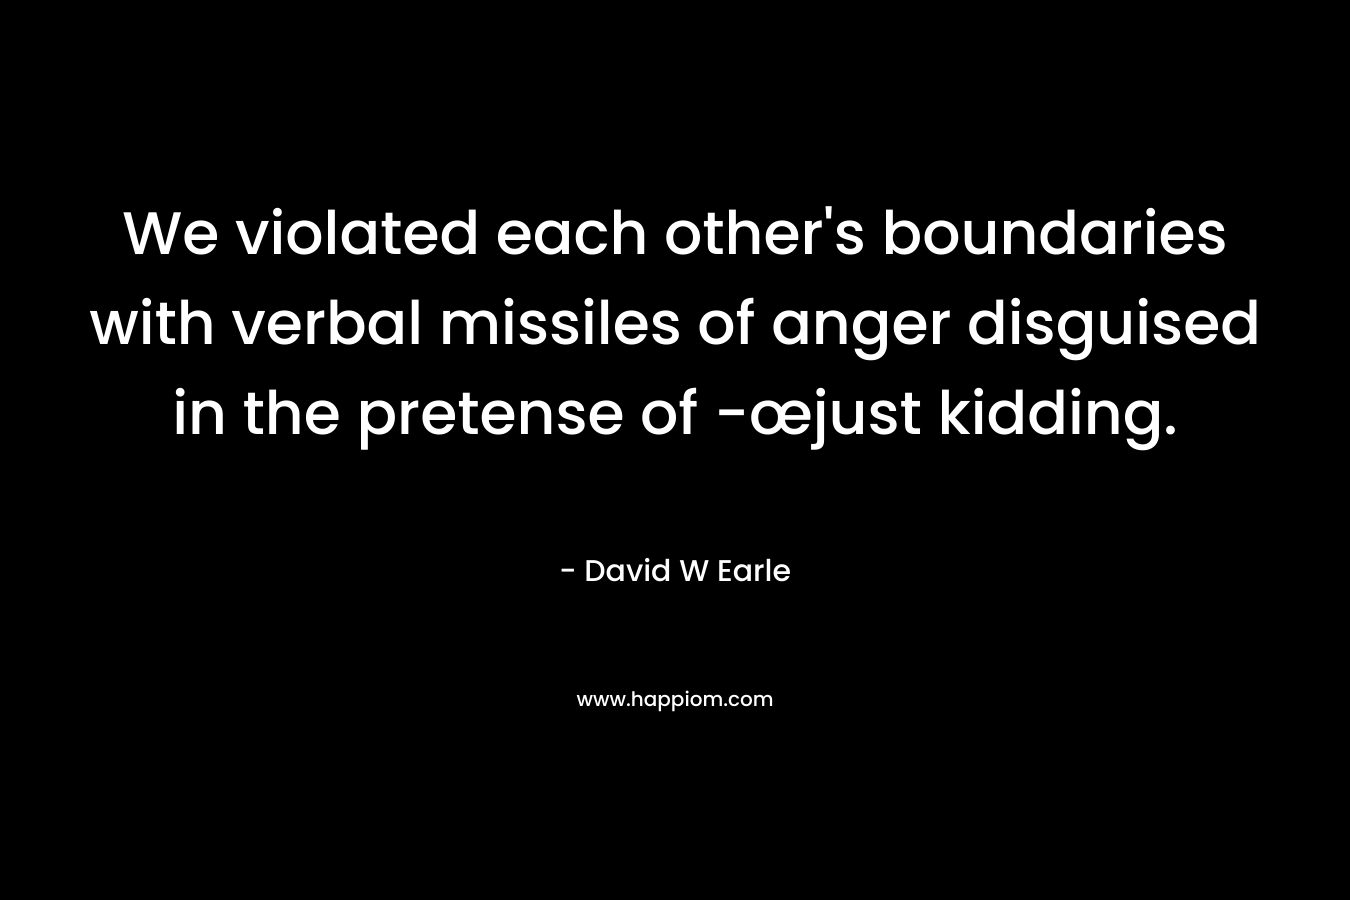 We violated each other's boundaries with verbal missiles of anger disguised in the pretense of -œjust kidding.